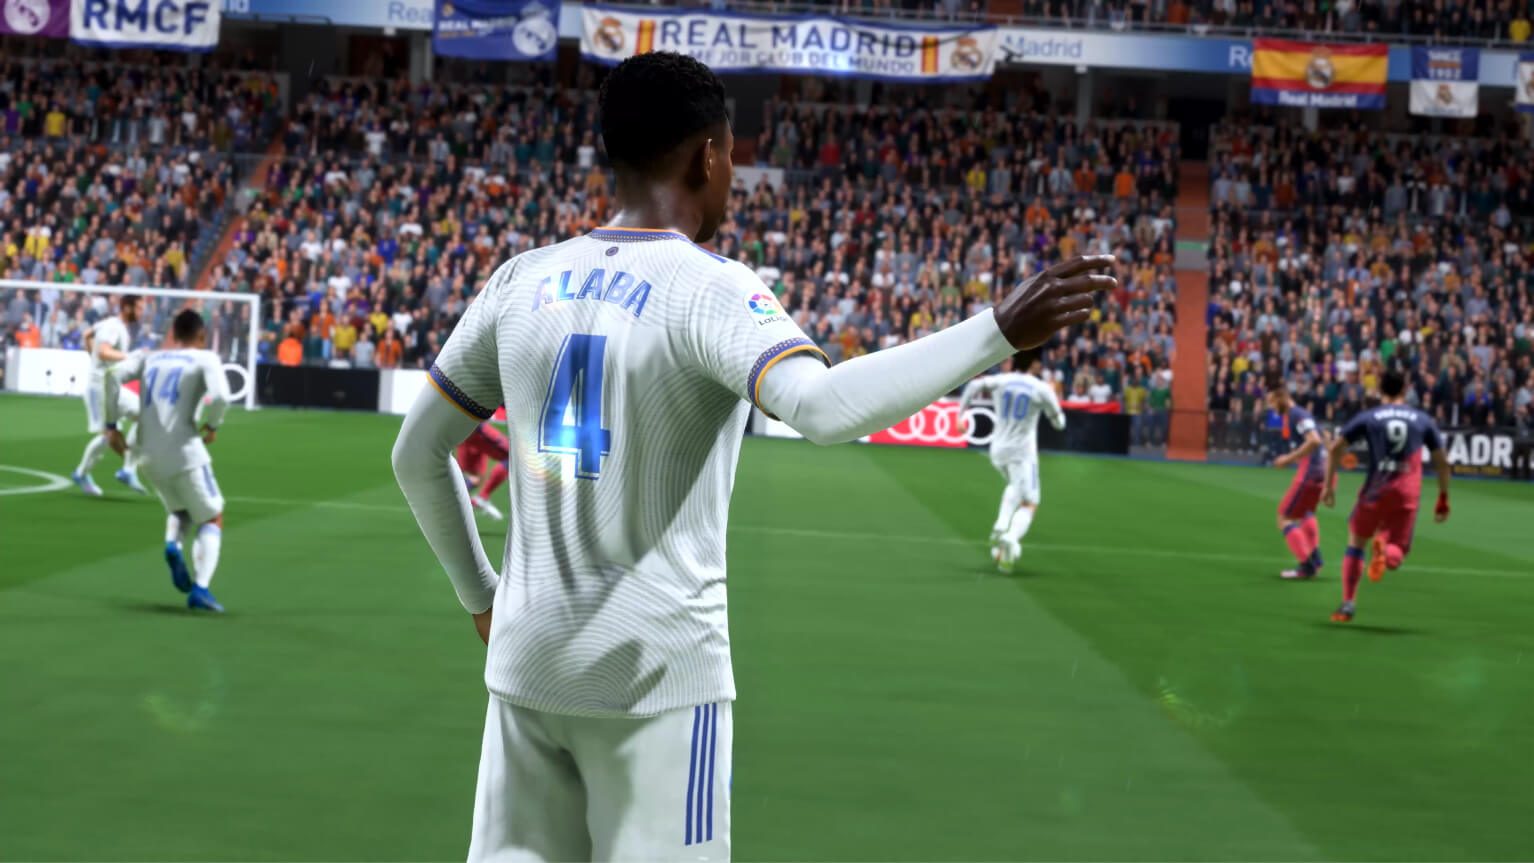 Stream Download FIFA 22 Now and Experience HyperMotion Gameplay Technology  by MestaPsaina